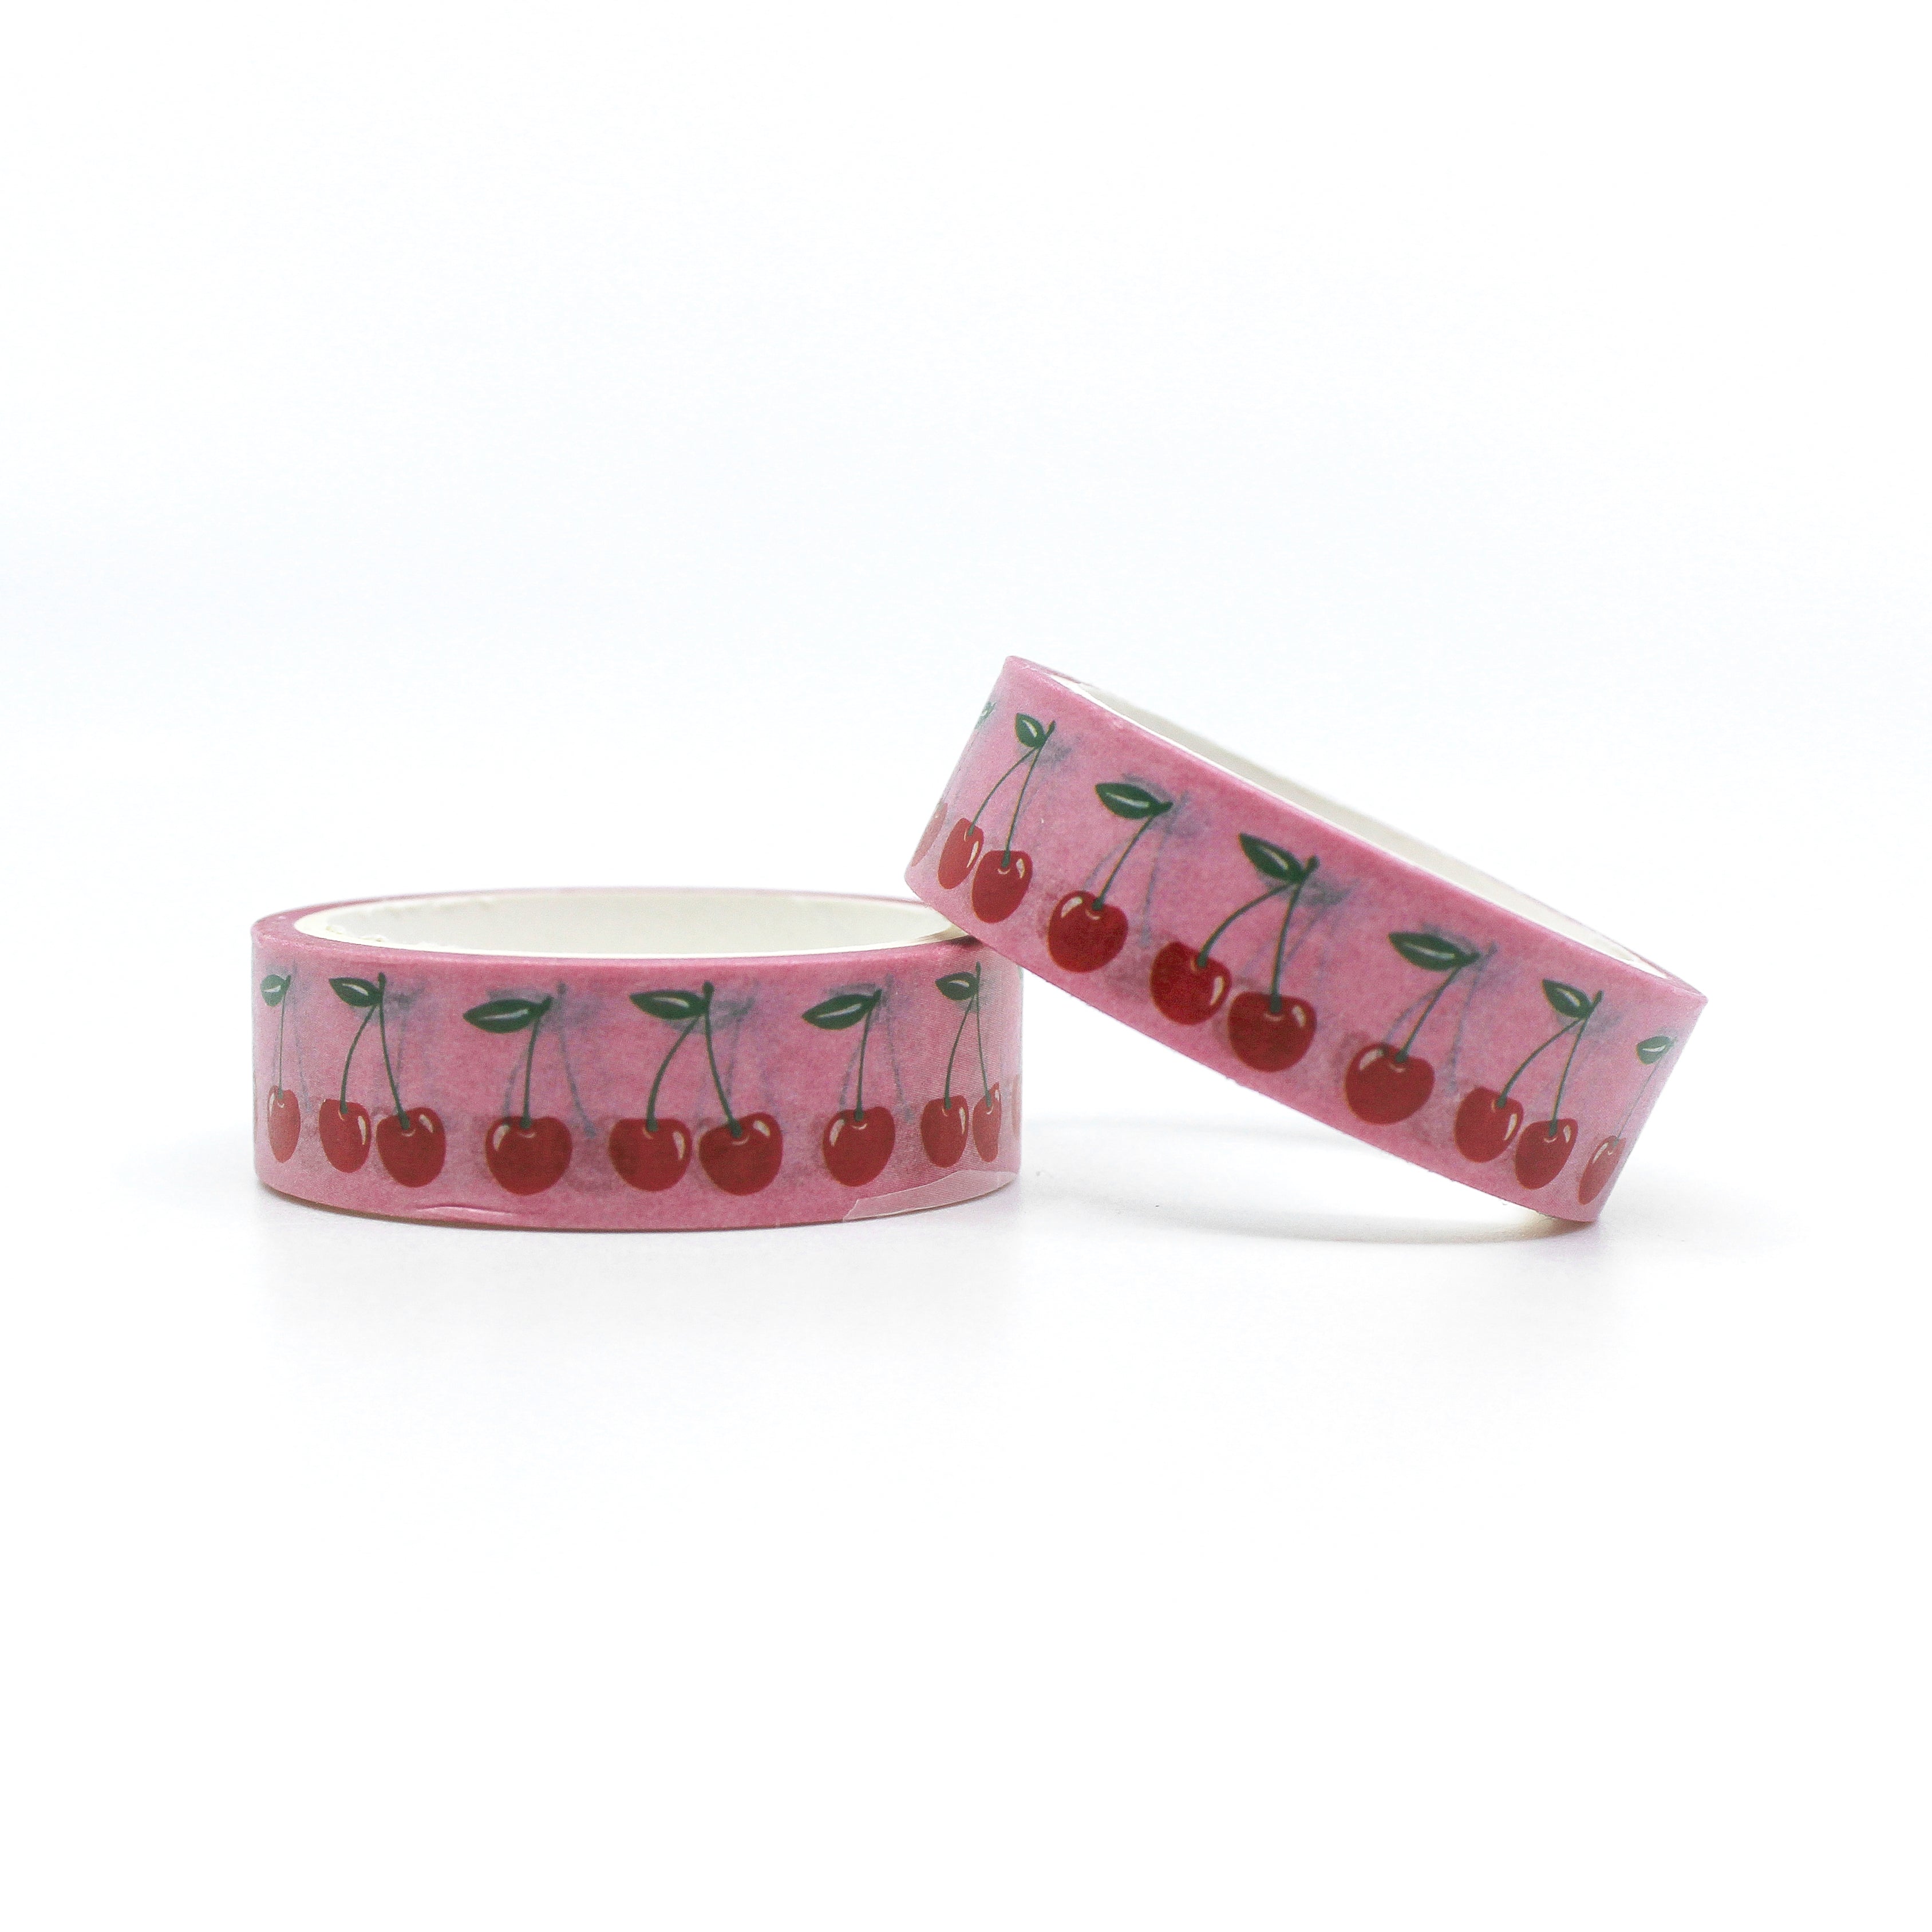 This is a sweet cherry washi tapes from BBB Supplies Craft Shop